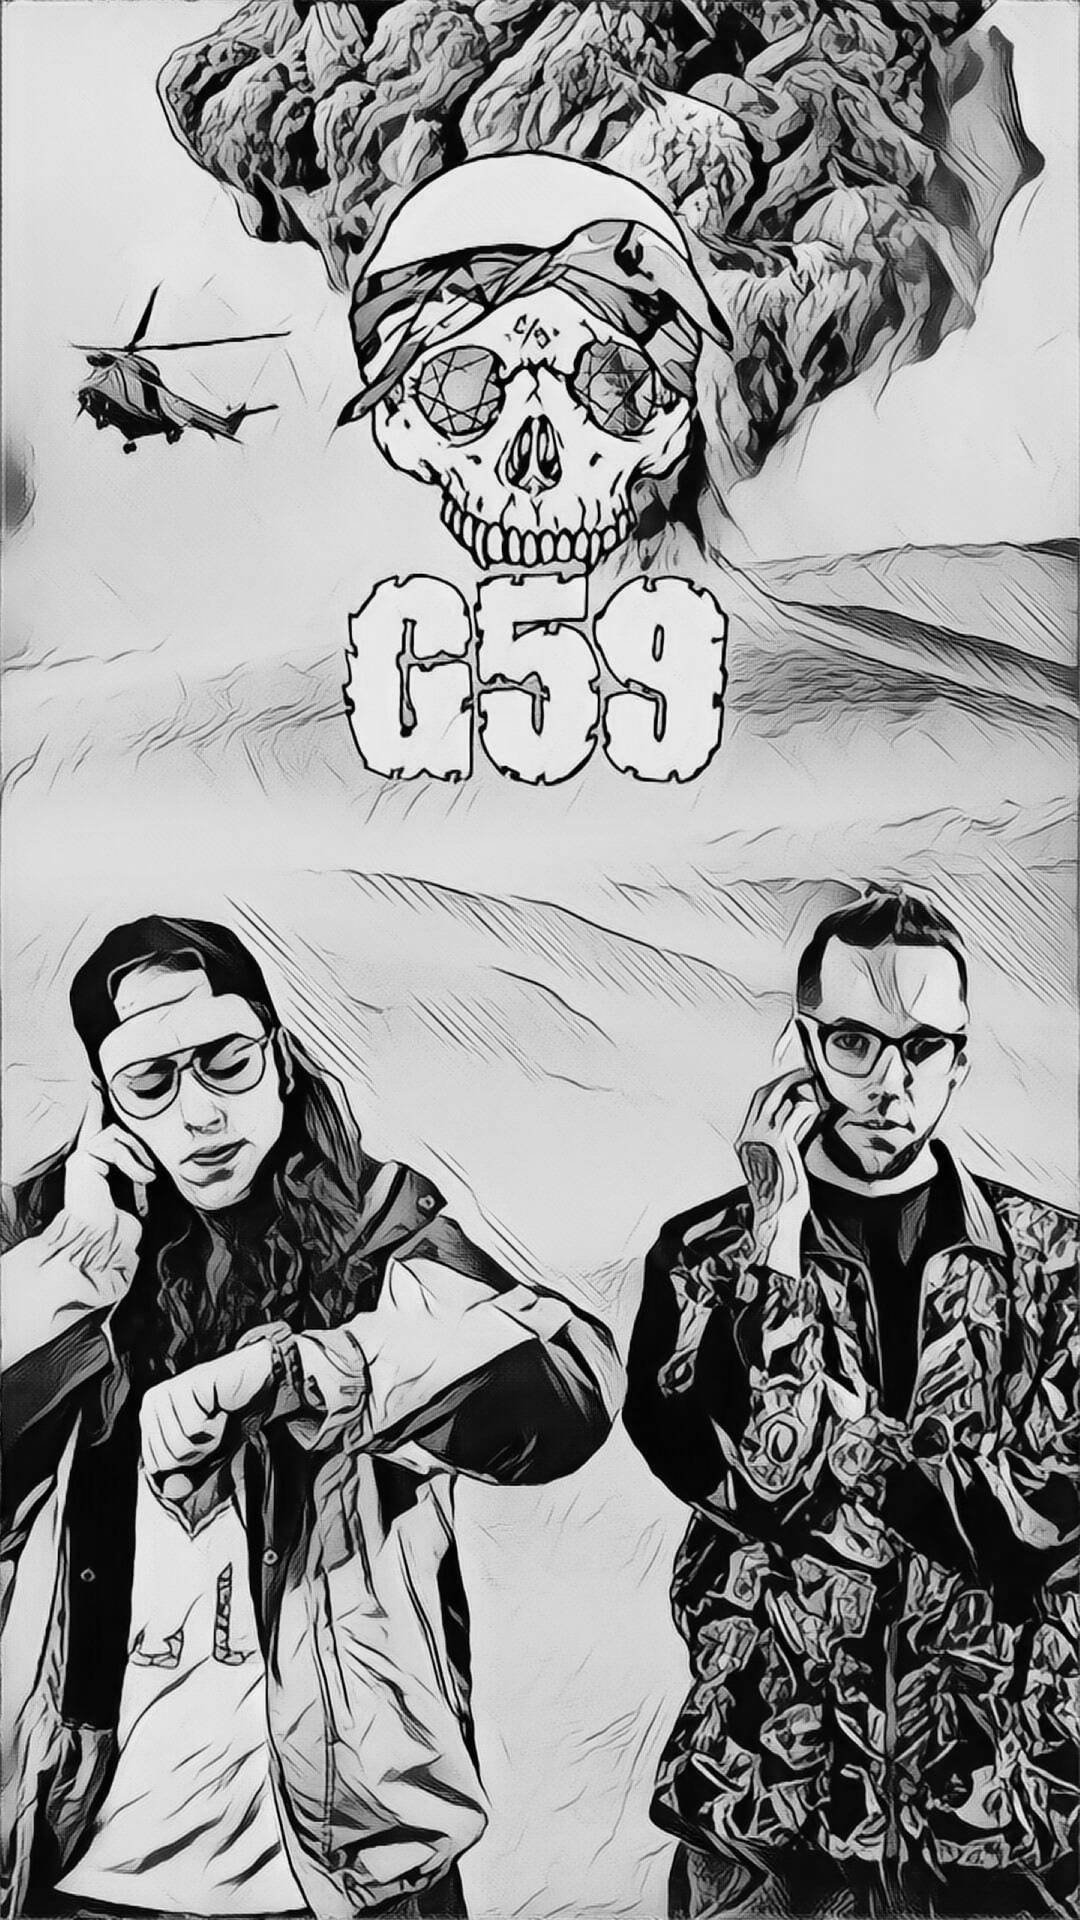 Top 999+ Suicideboys Wallpaper Full HD, 4K✅Free to Use